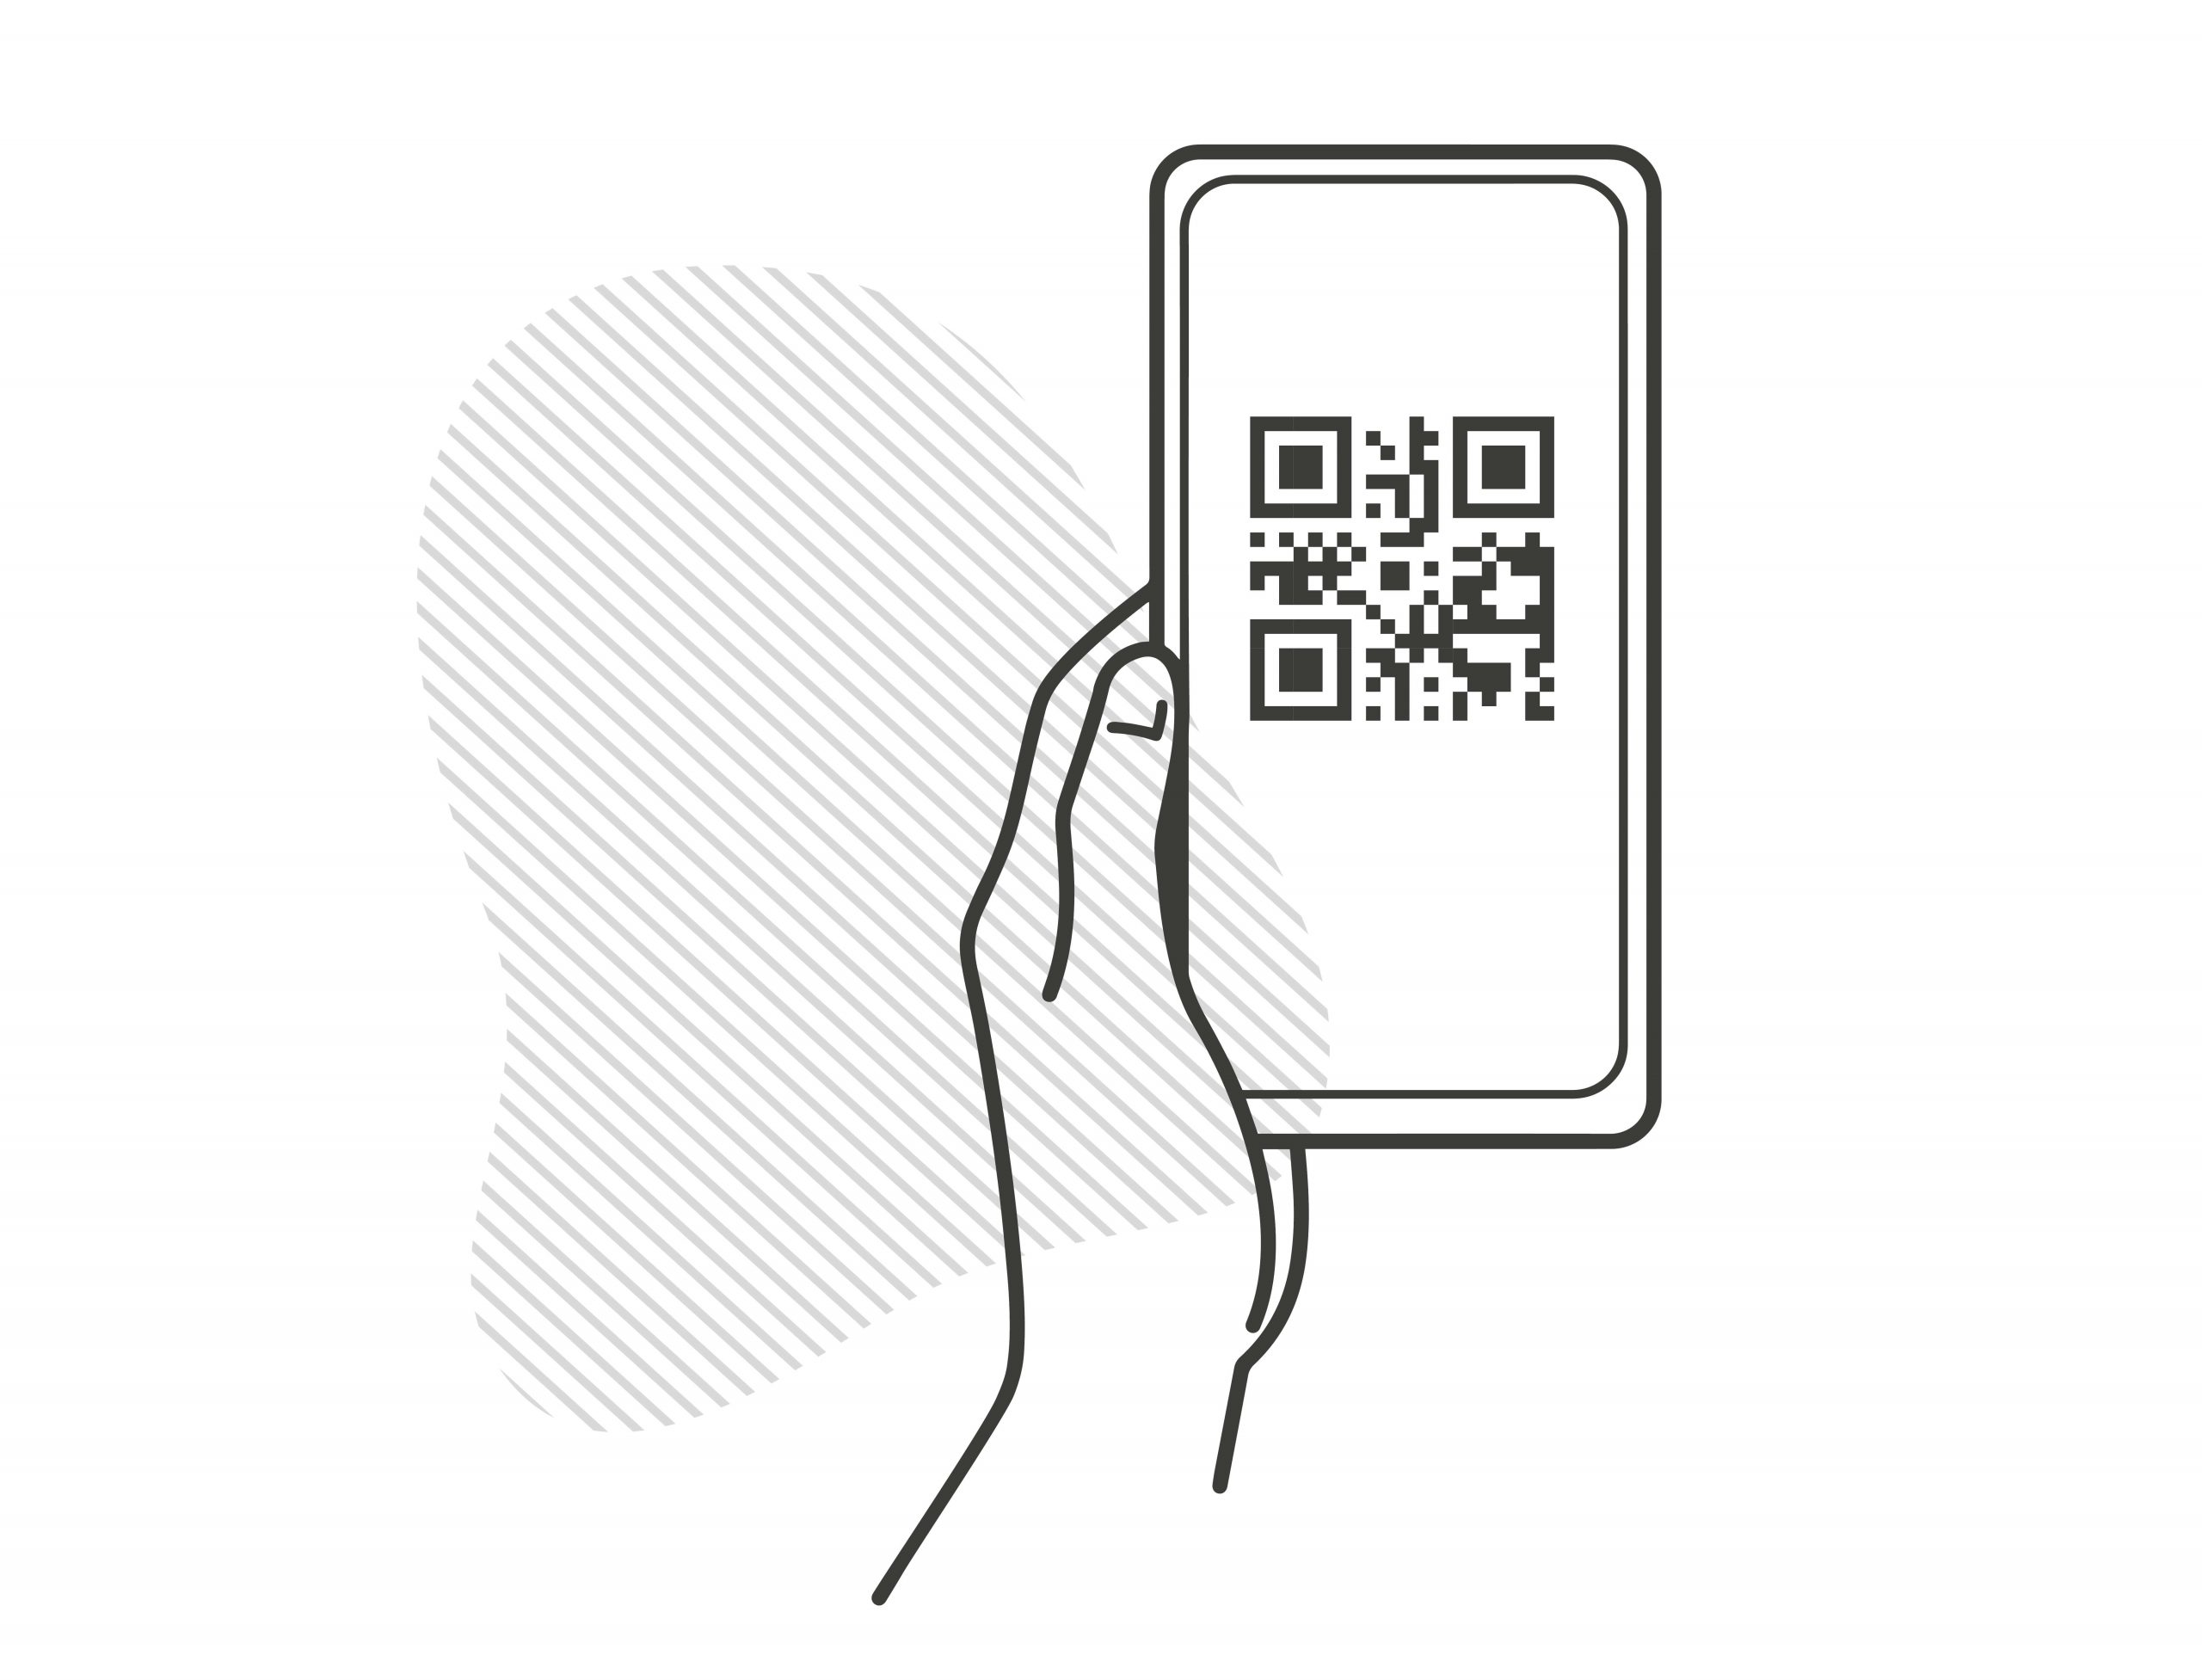 kamasys graphic QR payment